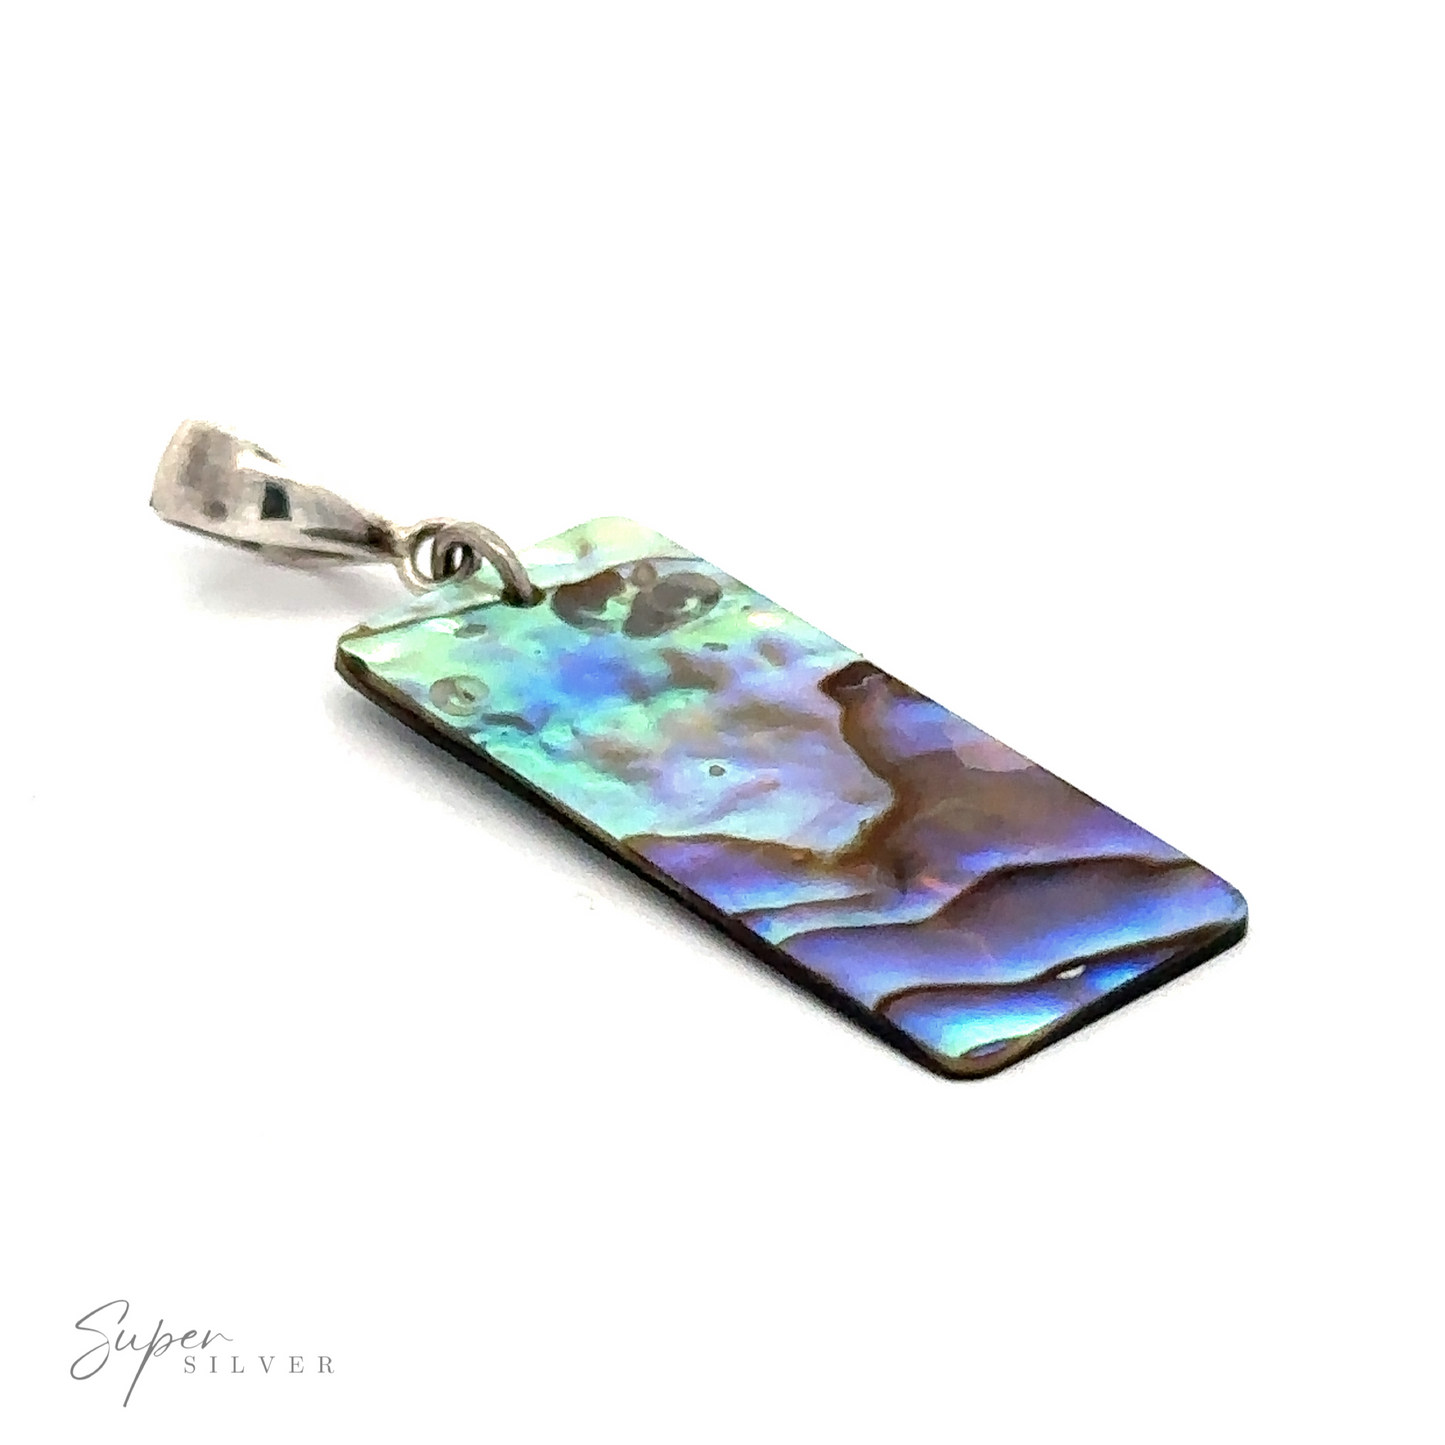 
                  
                    A handmade Rectangular Abalone Slab Pendant with a silver bail, boasting the iridescent beauty of abalone shell. Text in the bottom left corner reads "Super Silver.
                  
                